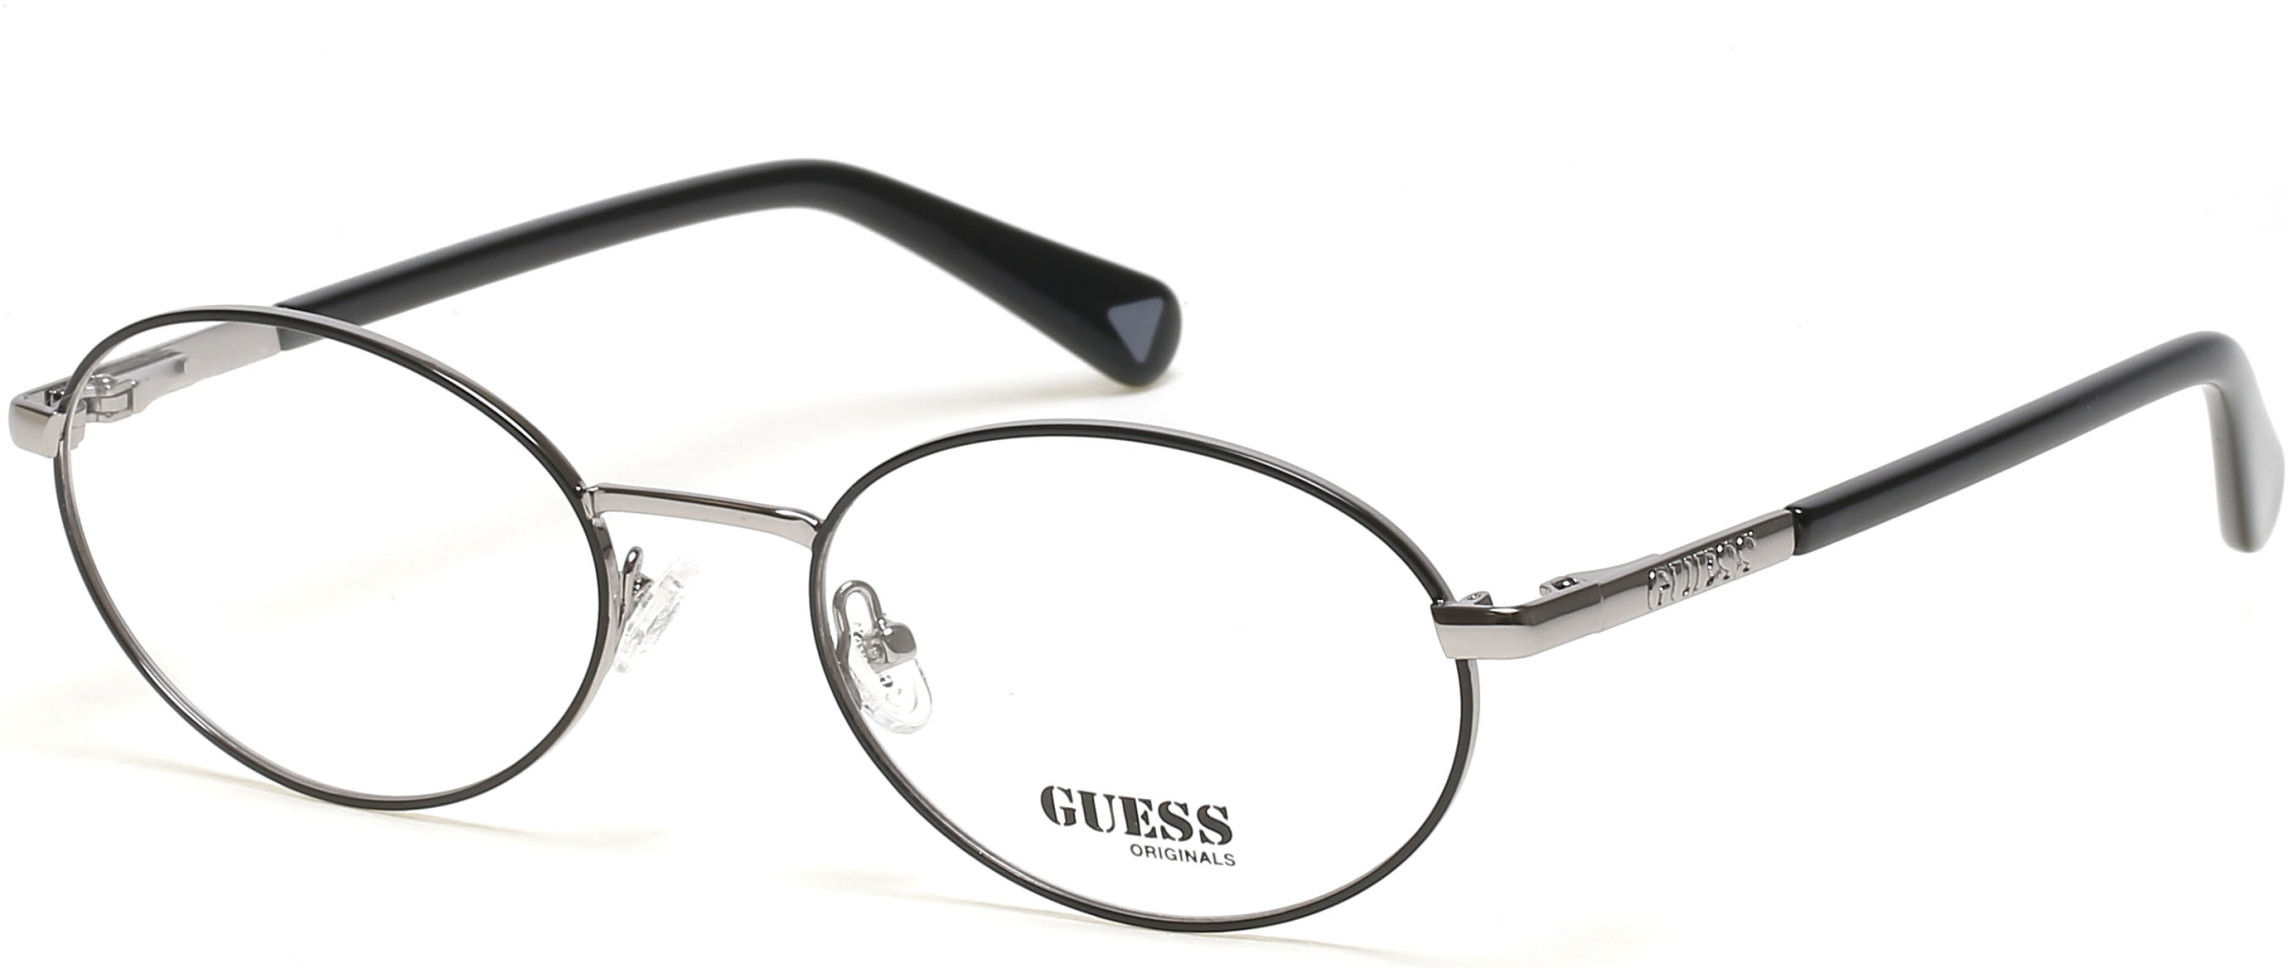 GUESS 8239 005